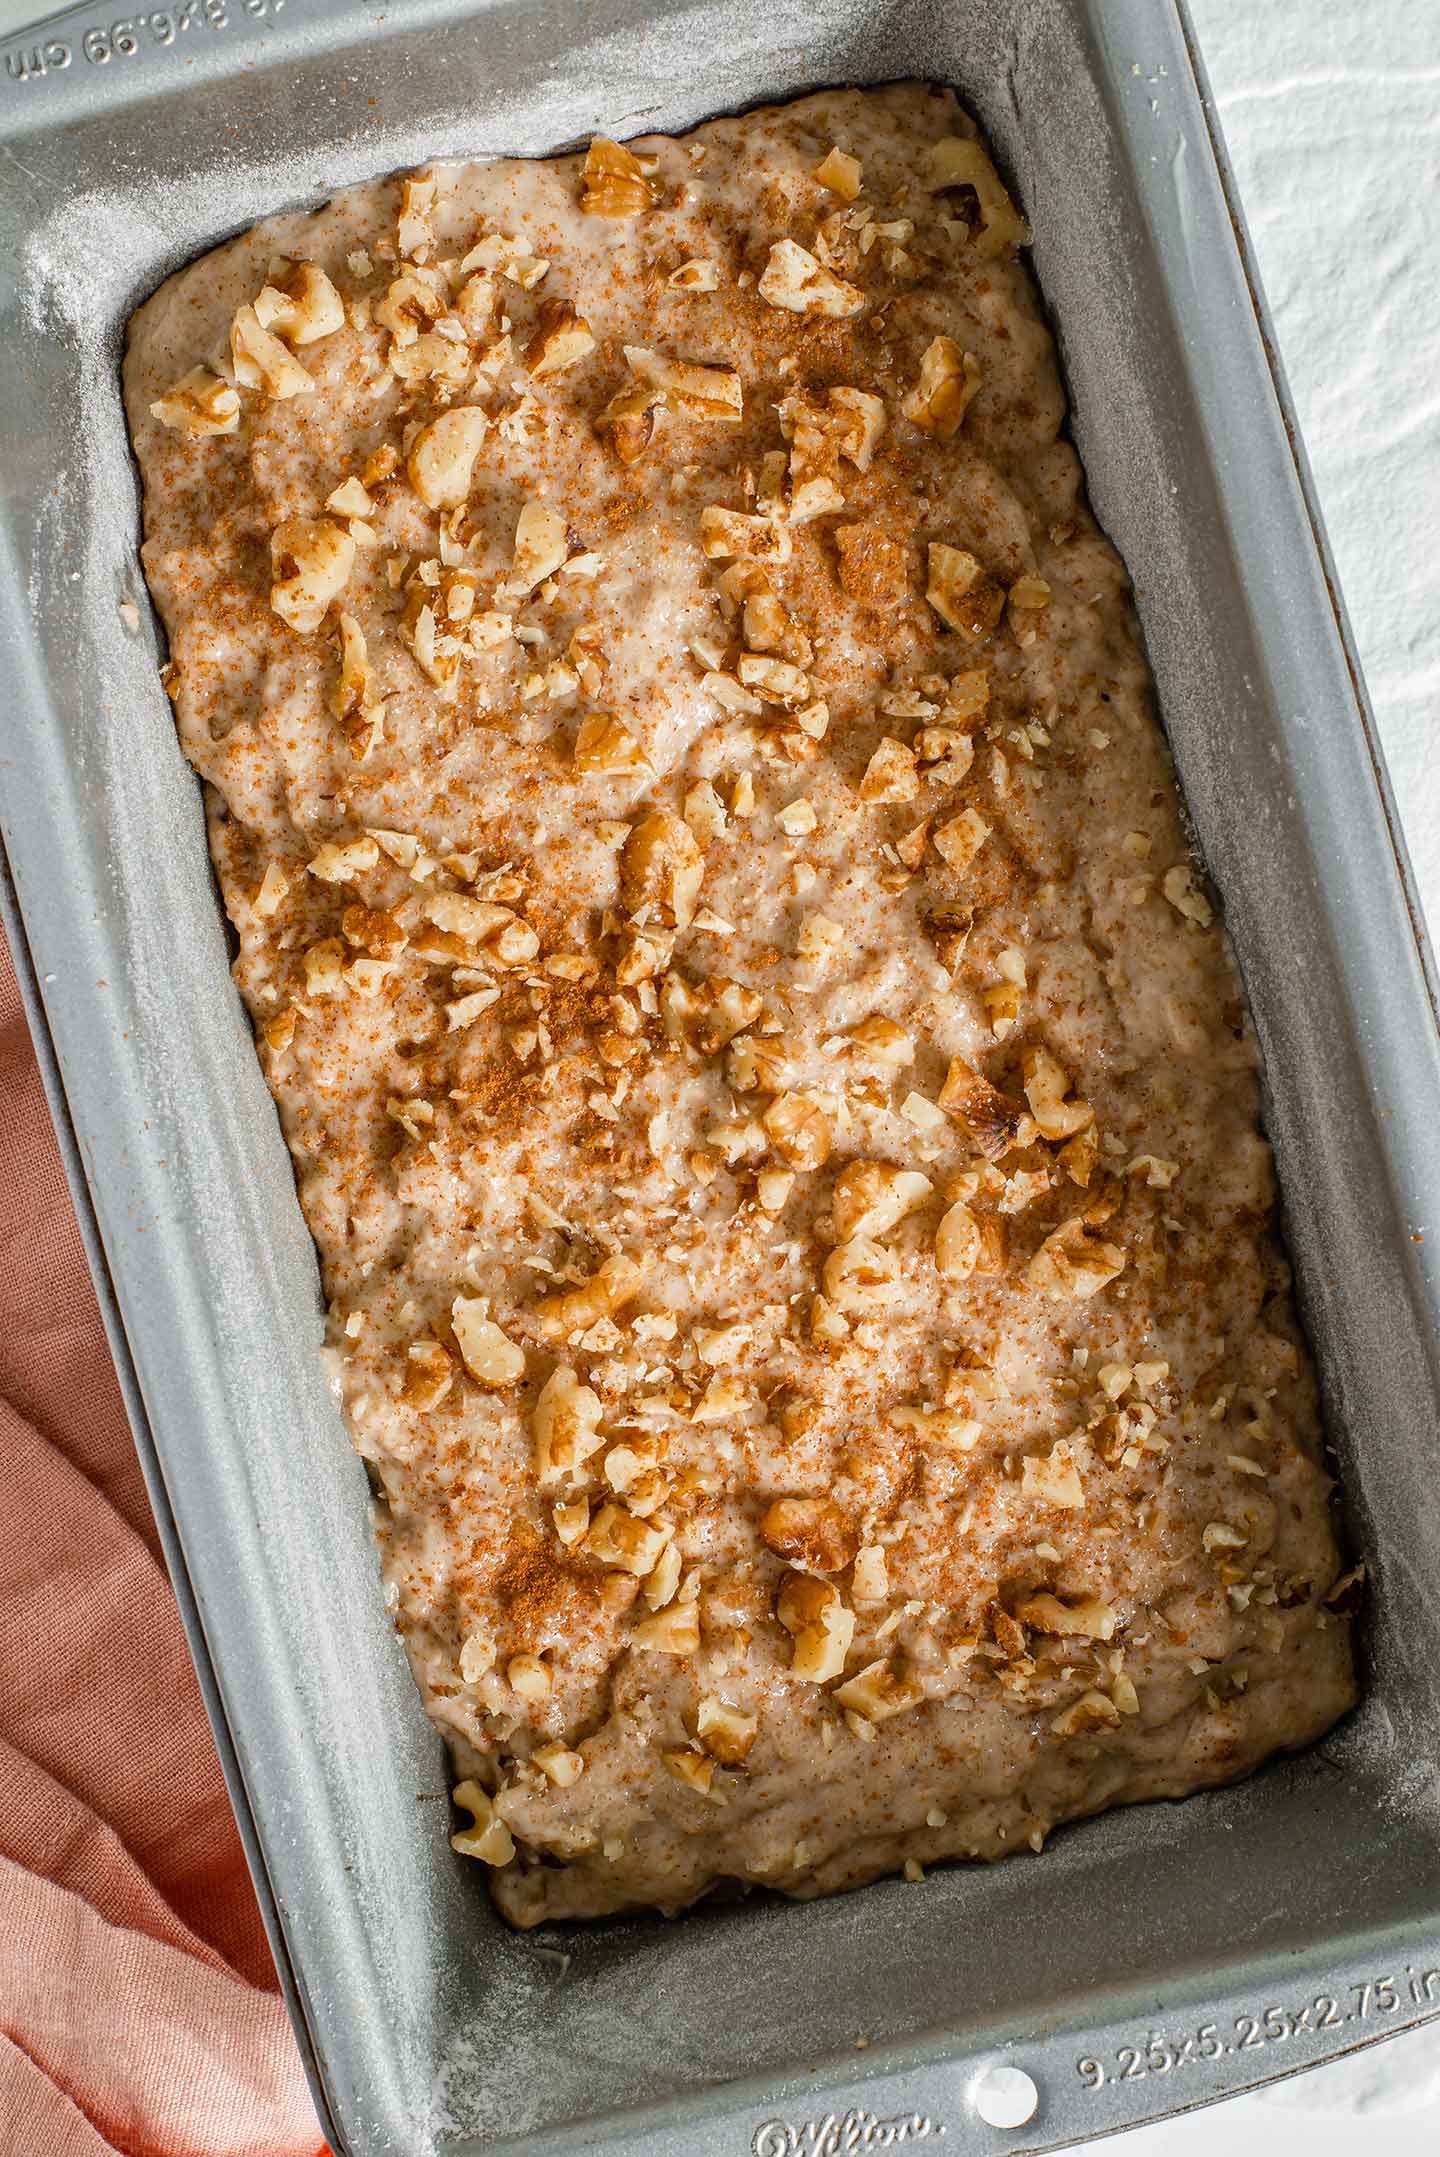 Top down view of vegan banana bread batter poured into a loaf pan. The top of the batter is sprinkled with chopped walnuts, sugar, and cinnamon.